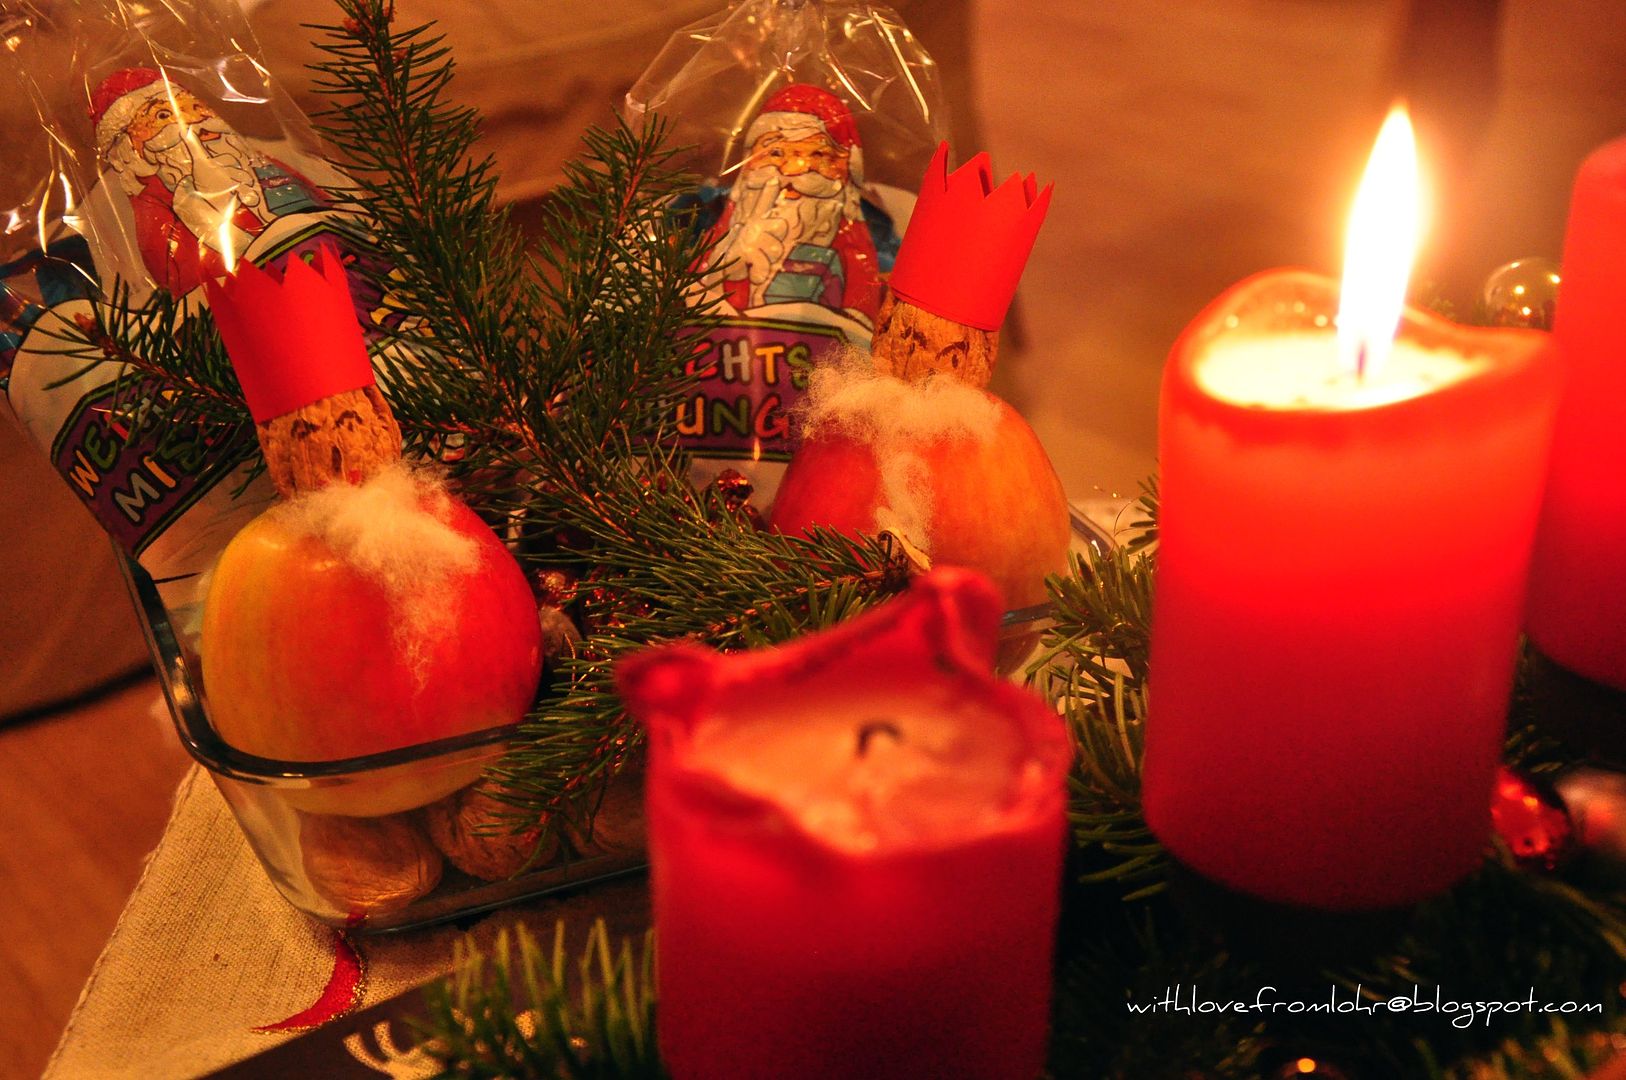 Today, German kids are waiting for Sankt Nikolaus!!!